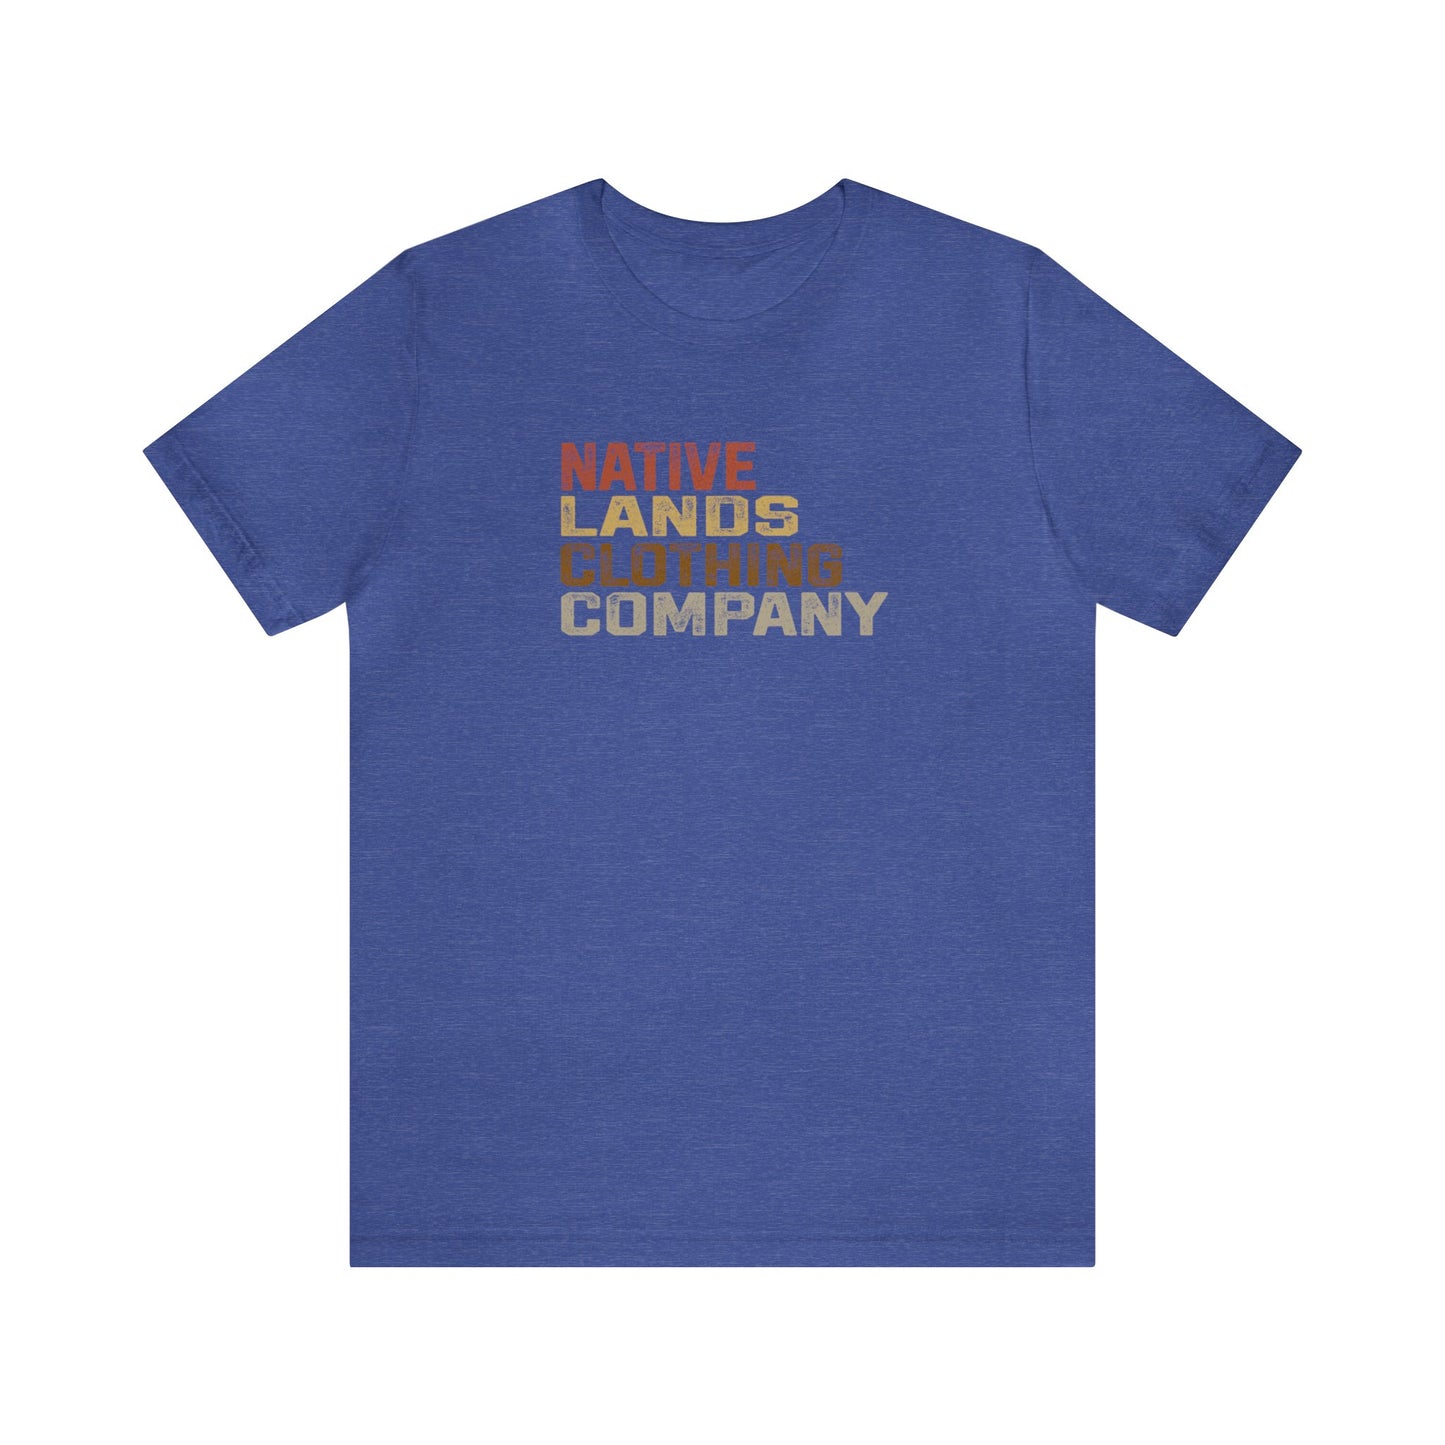 Native Lands Clothing Company Earth Shirt Baumwolle Indianer